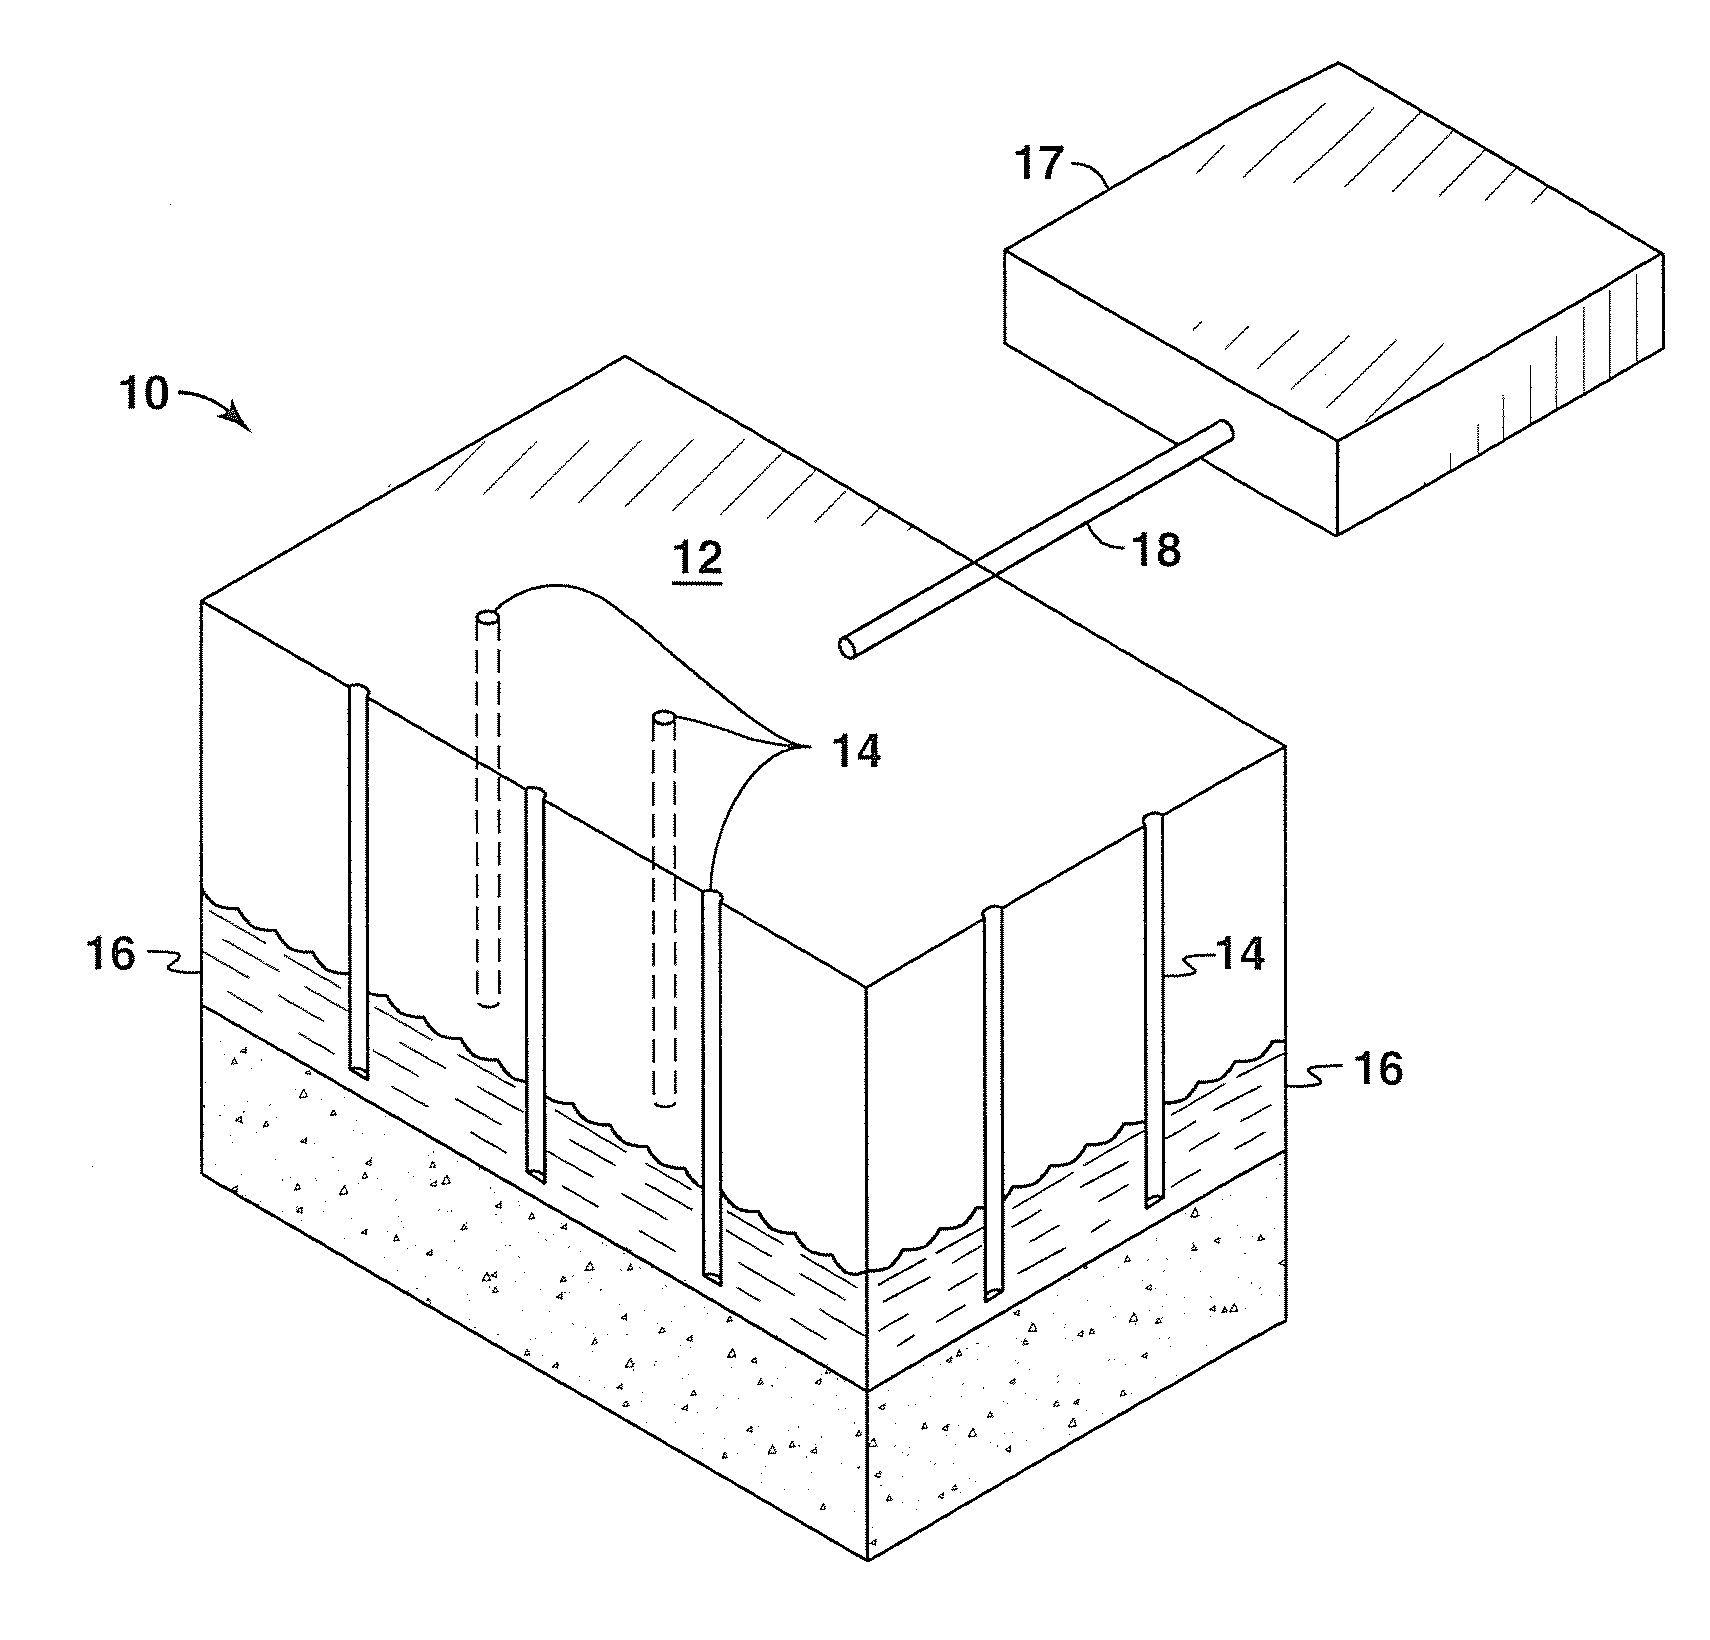 Process For Producing Hydrocarbon Fluids Combining In Situ Heating, A Power Plant And A Gas Plant